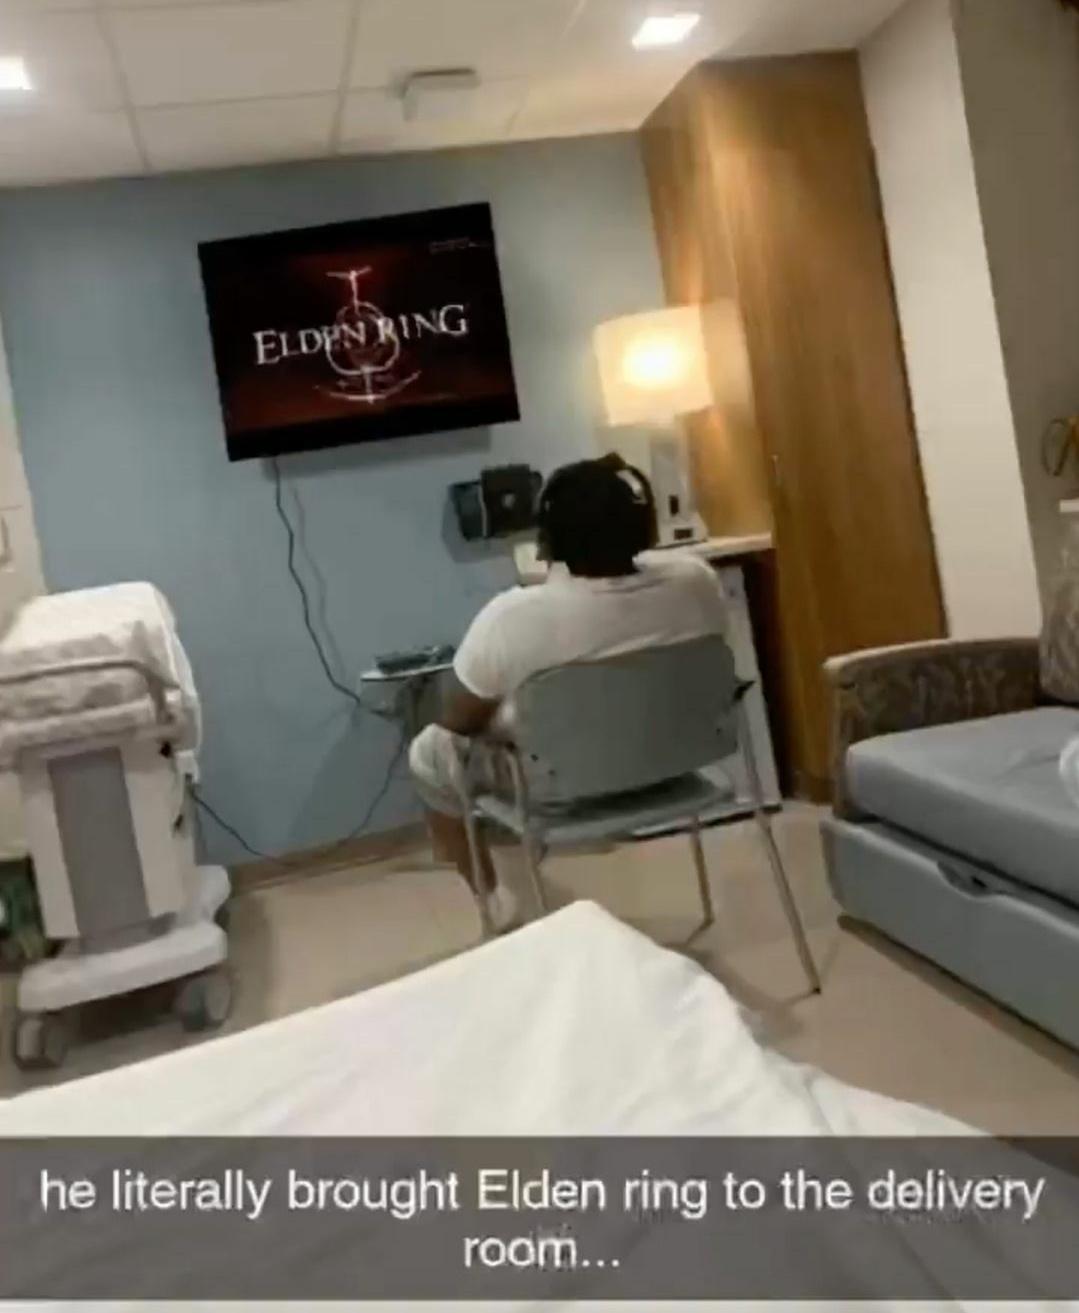 gaming memes - he literally brought elden ring to the delivery room - El Den Ring he literally brought Elden ring to the delivery room...